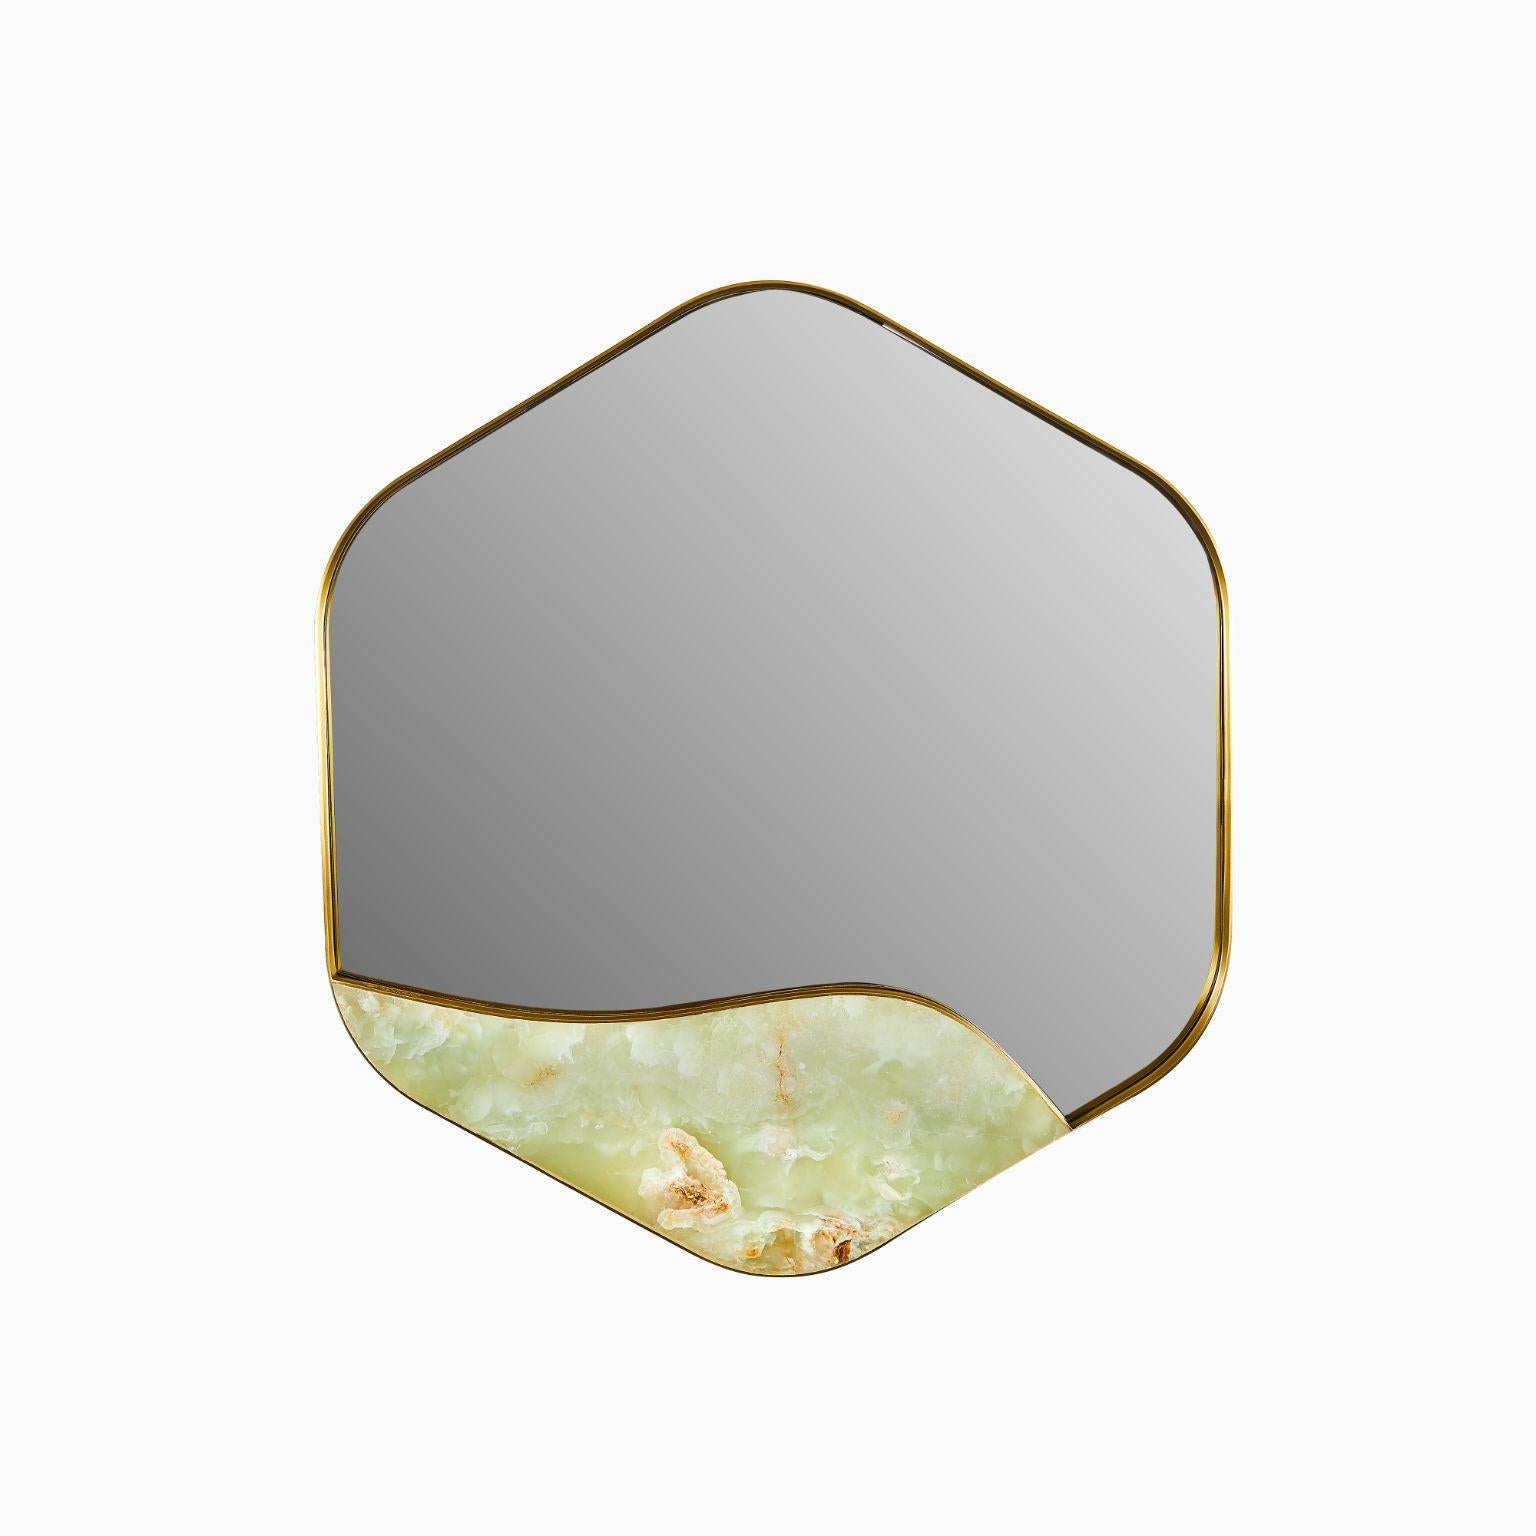 Aras mirror green onyx by Marble Balloon
Dimensions: L 5cm x W 83.5cm x H 76.5cm
Materials: Brass, onyx green stone.

100% brass material is used in the frame and green onyx stone is used in the lower part.

Marble balloon is an interior